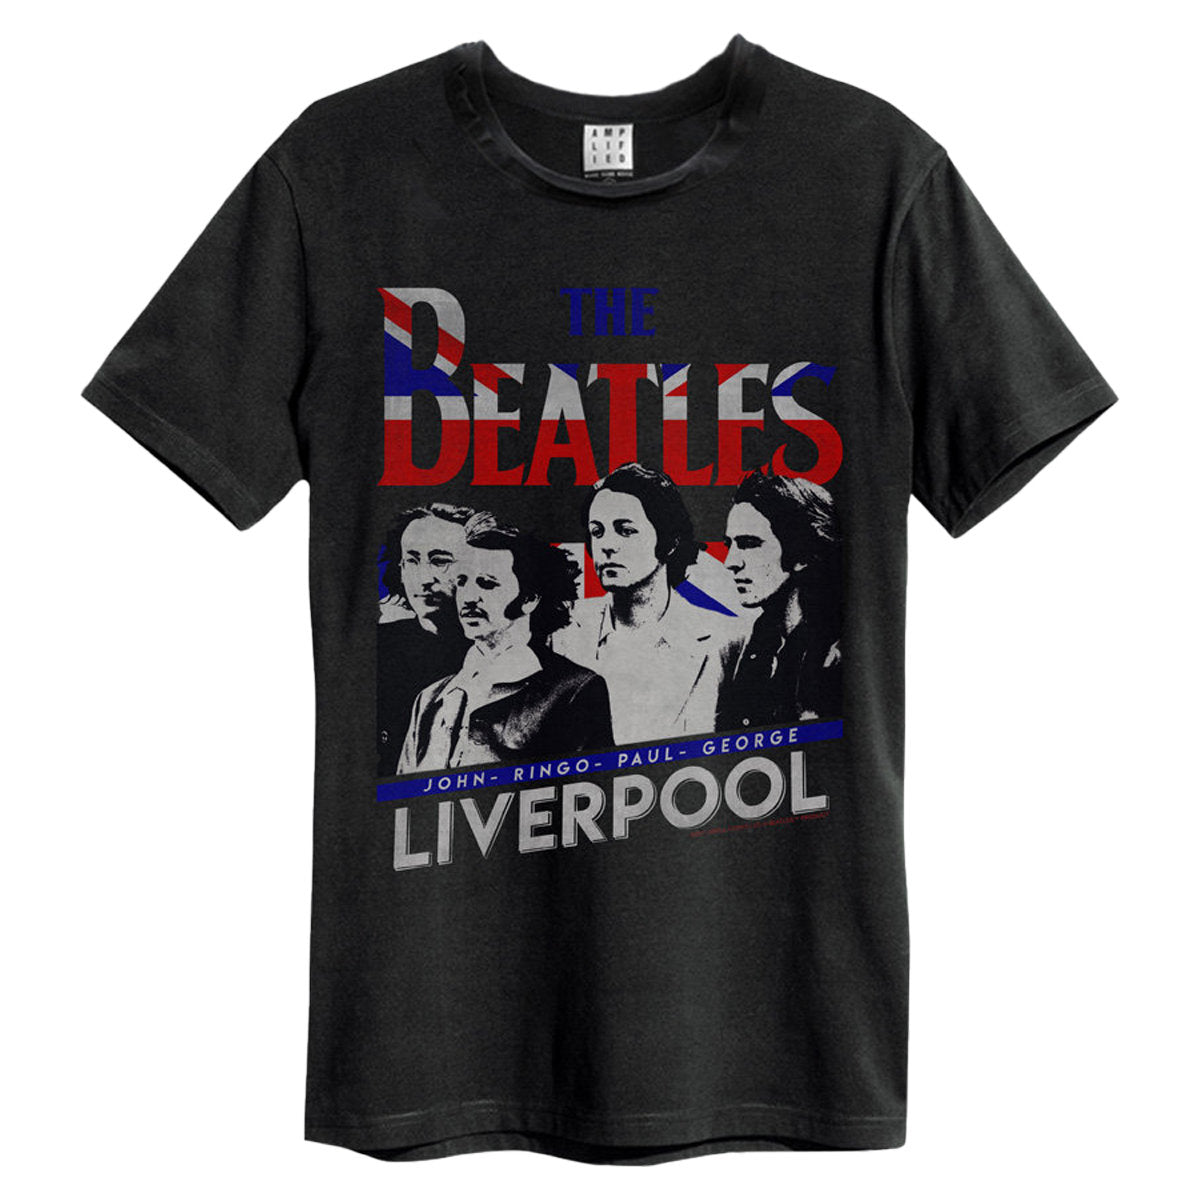 The Beatles - Liverpool